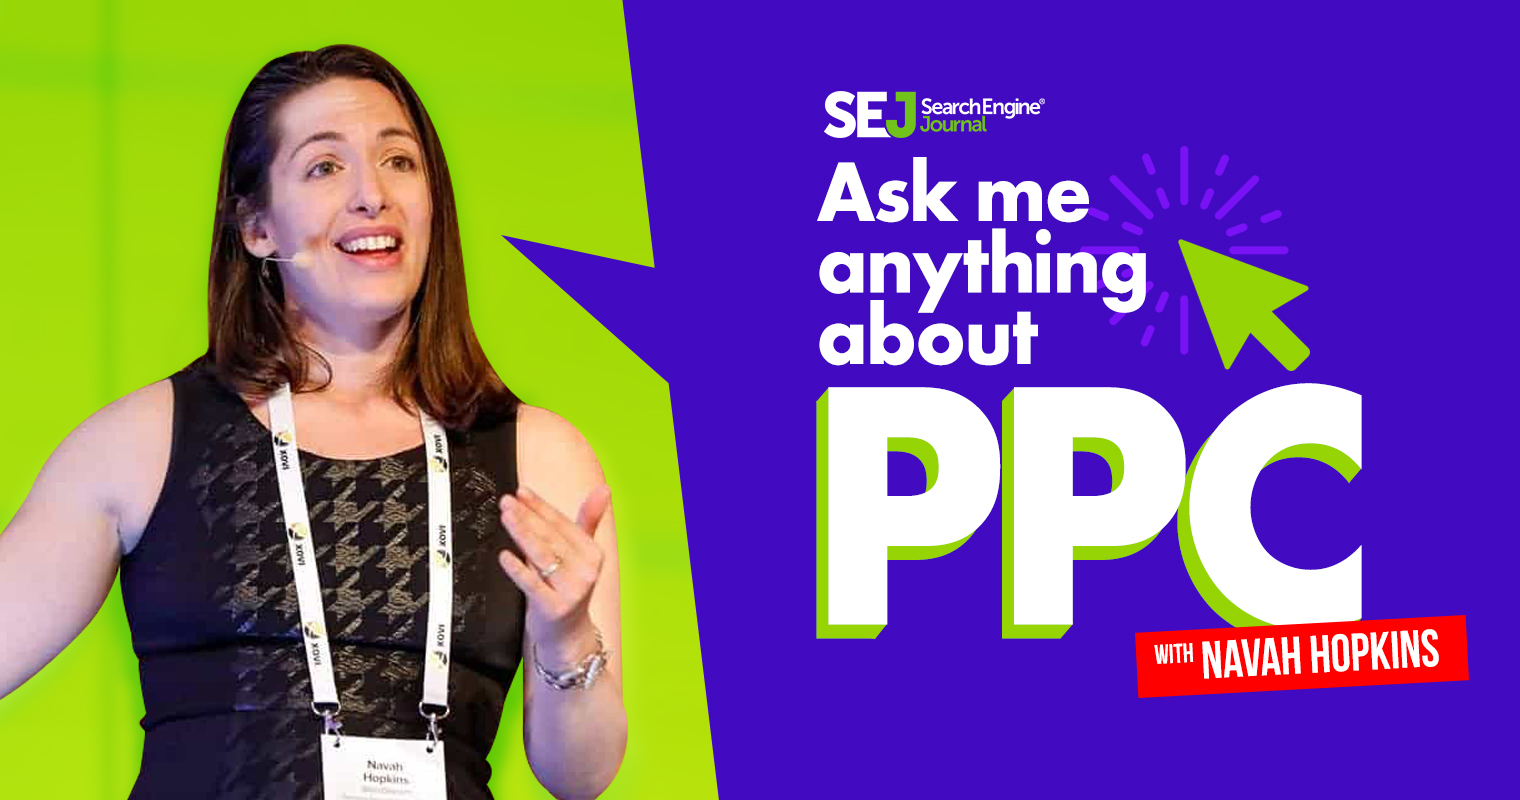 How Can I Build On SEO Knowledge To Be Better In PPC? via @sejournal, @navahf